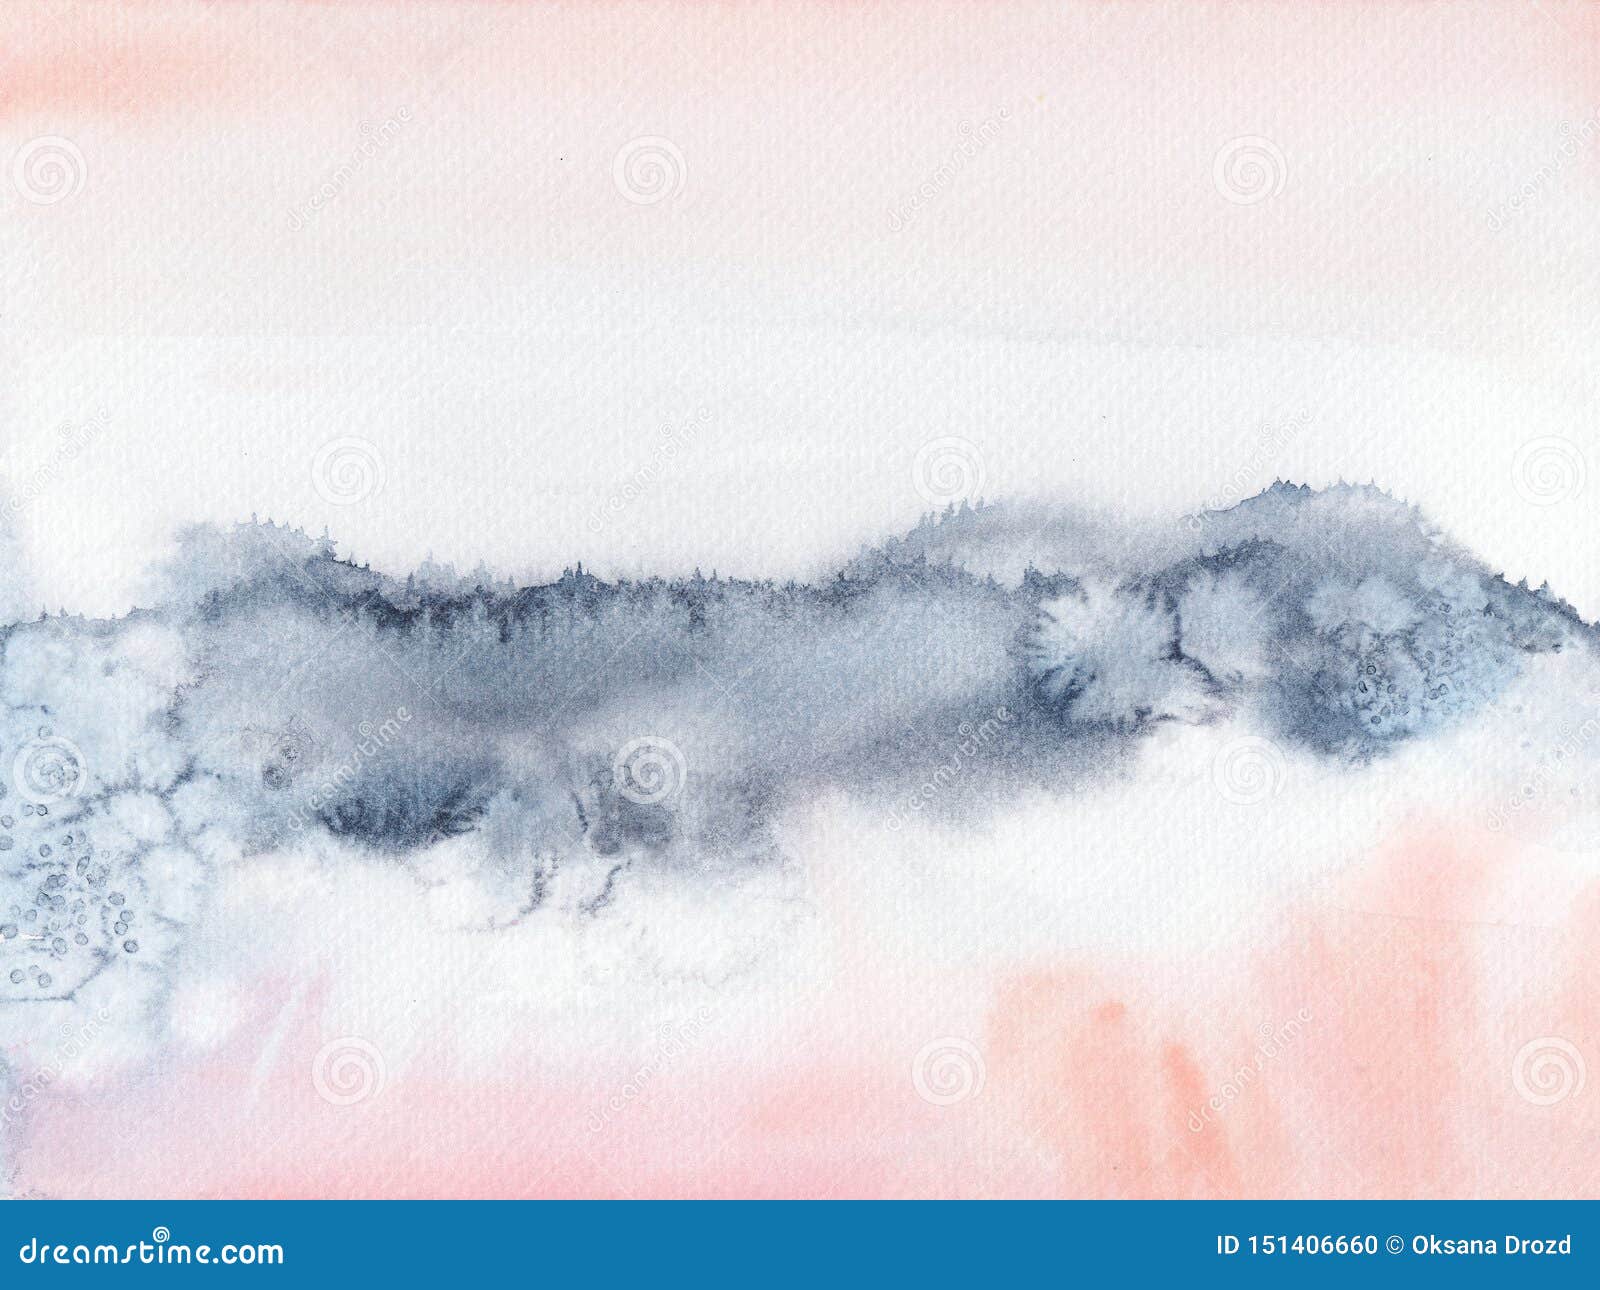 Blush Pink And Navyblue Abstract Watercolor Hand Painted Landscape Stock Photo - Image Of Blue, Gray: 151406660